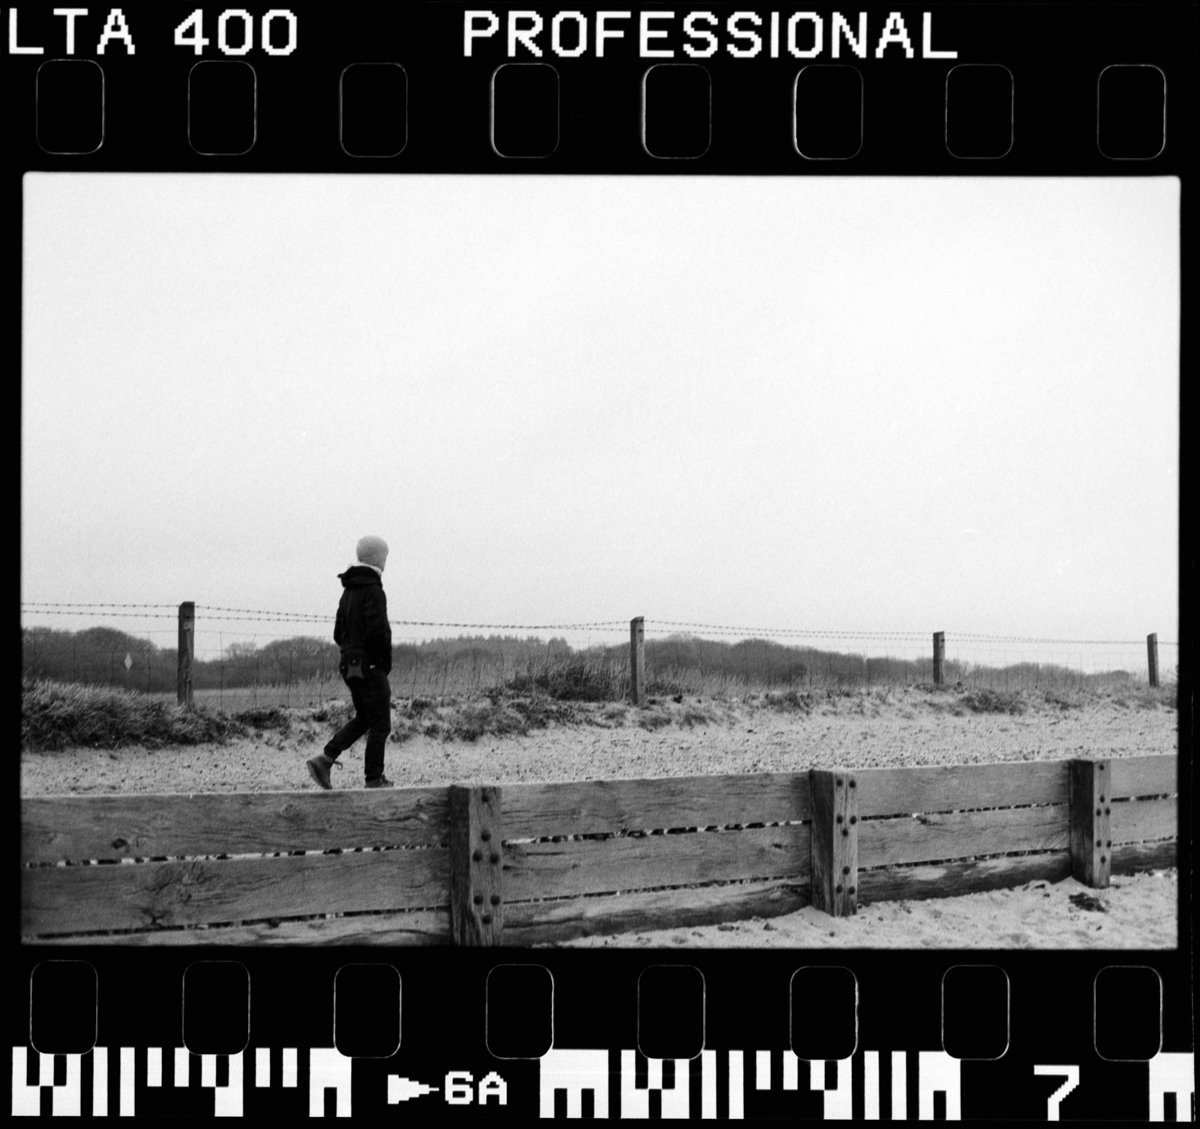 Grainy black and white film photo of a man walking by the coast